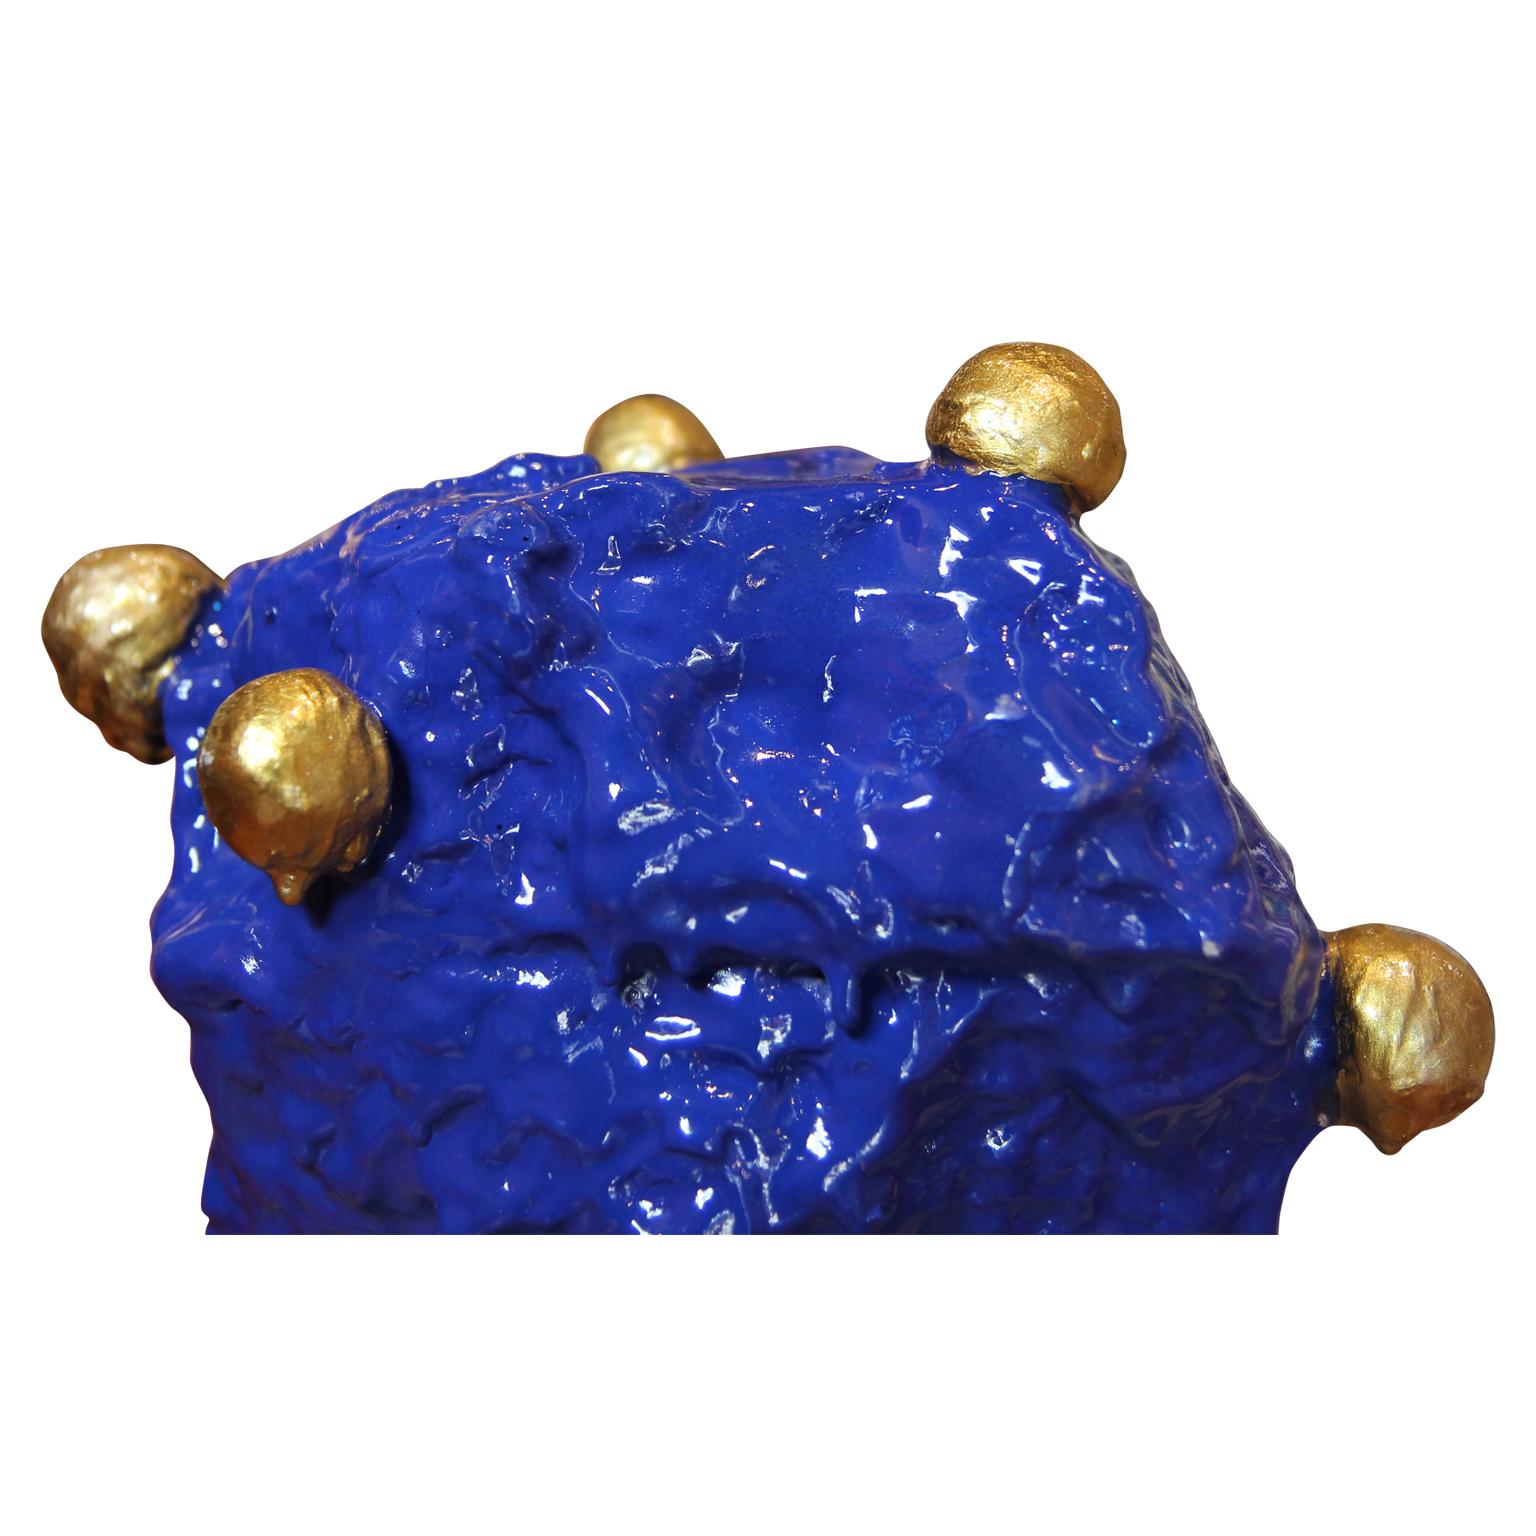 Blue decorative sculpture with gold accents by Houston, TX contemporary artist Jude Rosemond. Sculpture is made from concrete, clay, stone with rosewater as the liquid base. This sculpture is a great, fun and classy addition to a modern contemporary